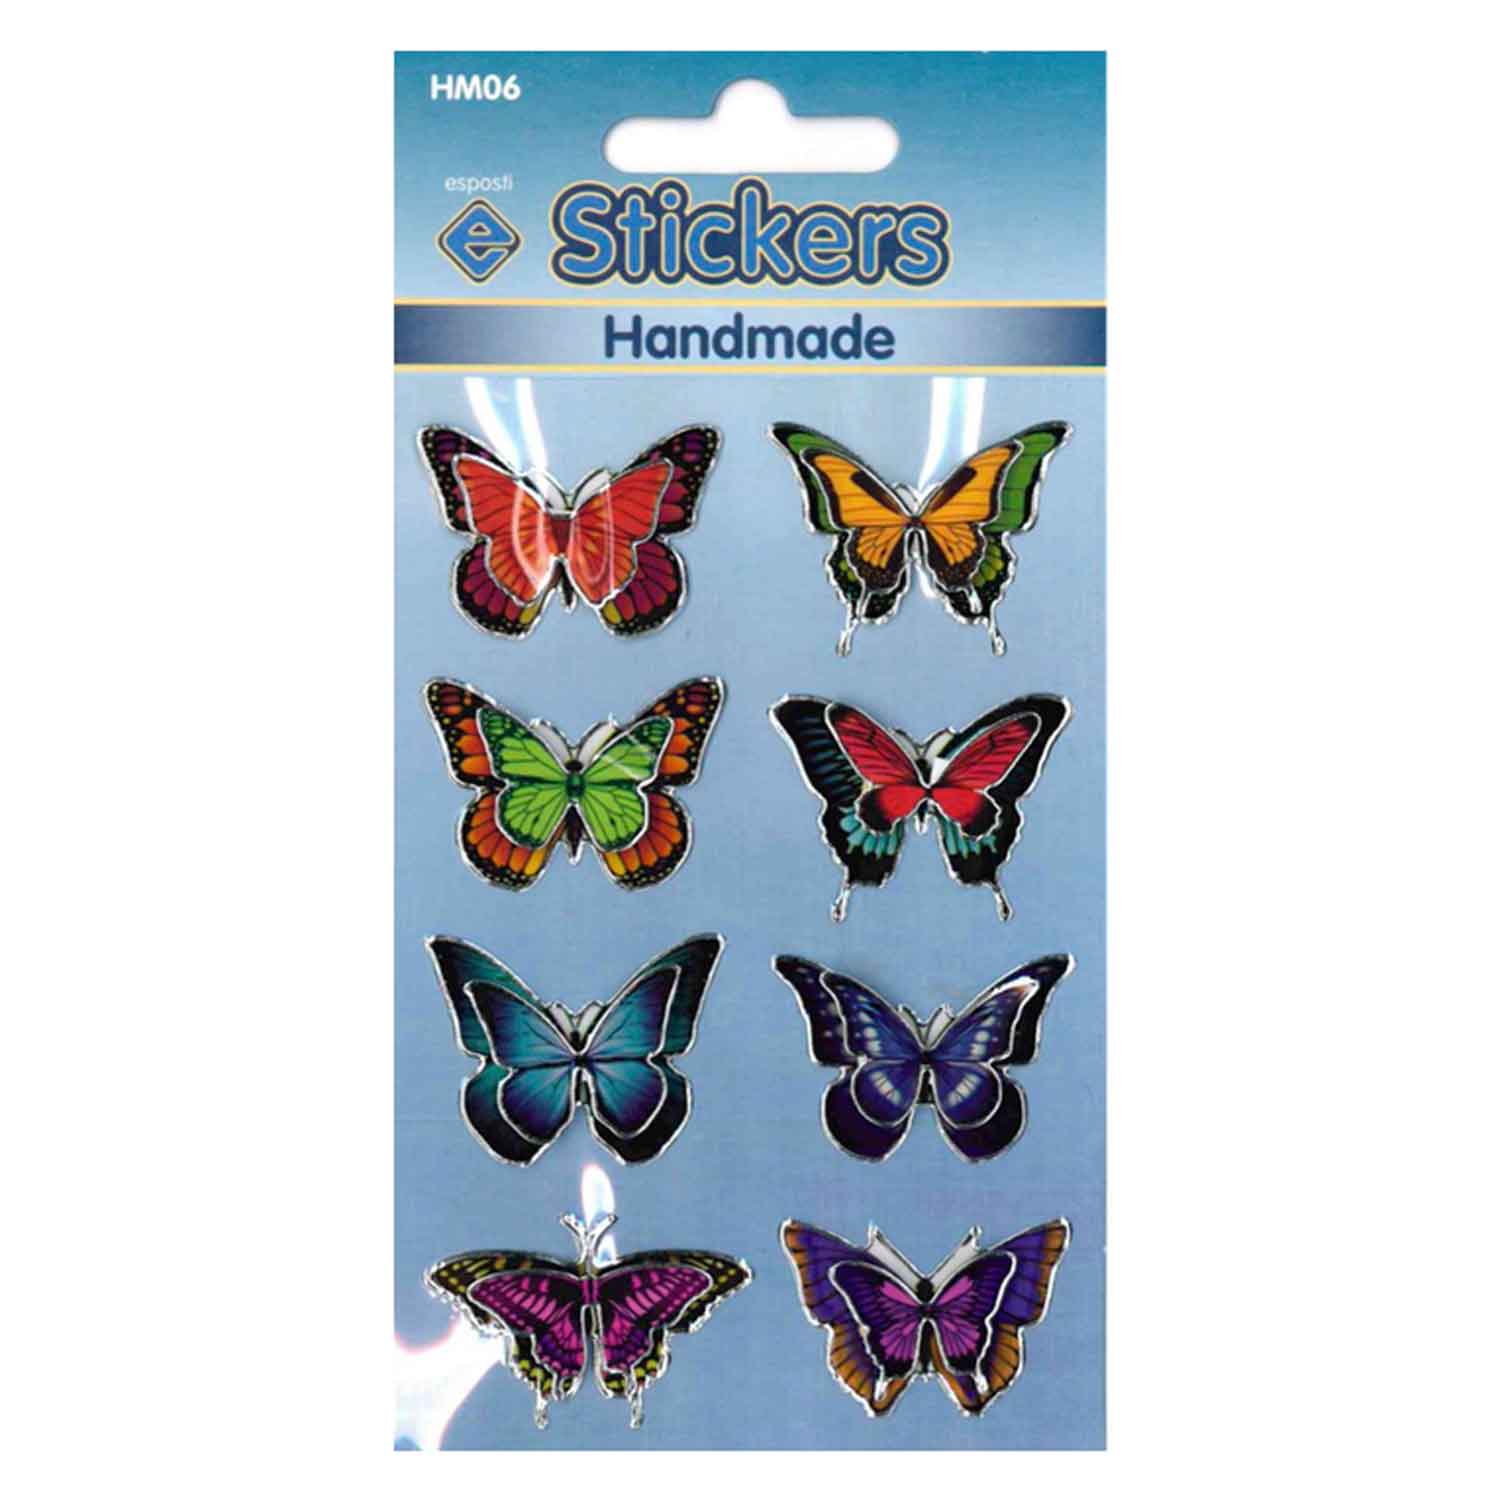 Butterfly Self Adhesive Handmade Novelty Stickers - Pack of 10